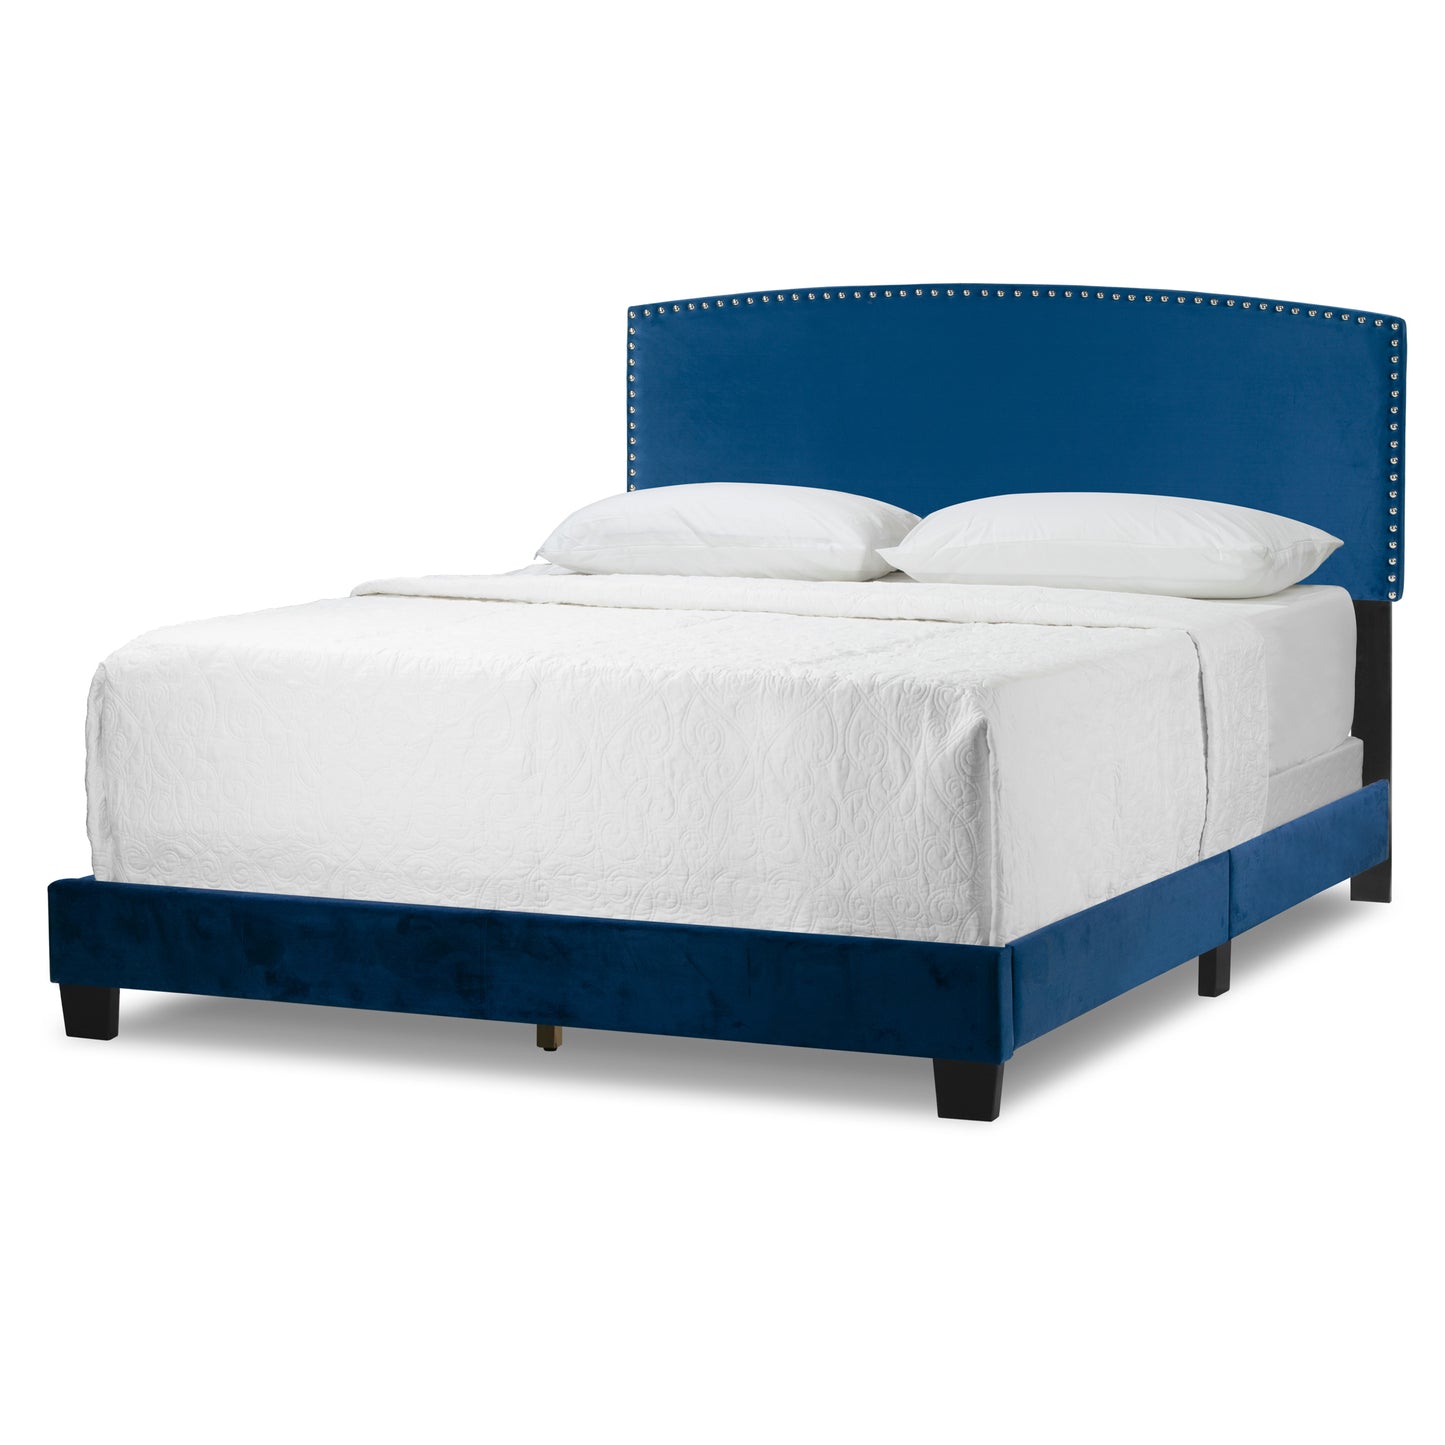 Ausca Navy Blue Velvety Fabric Queen Bed with Nail Head Trim